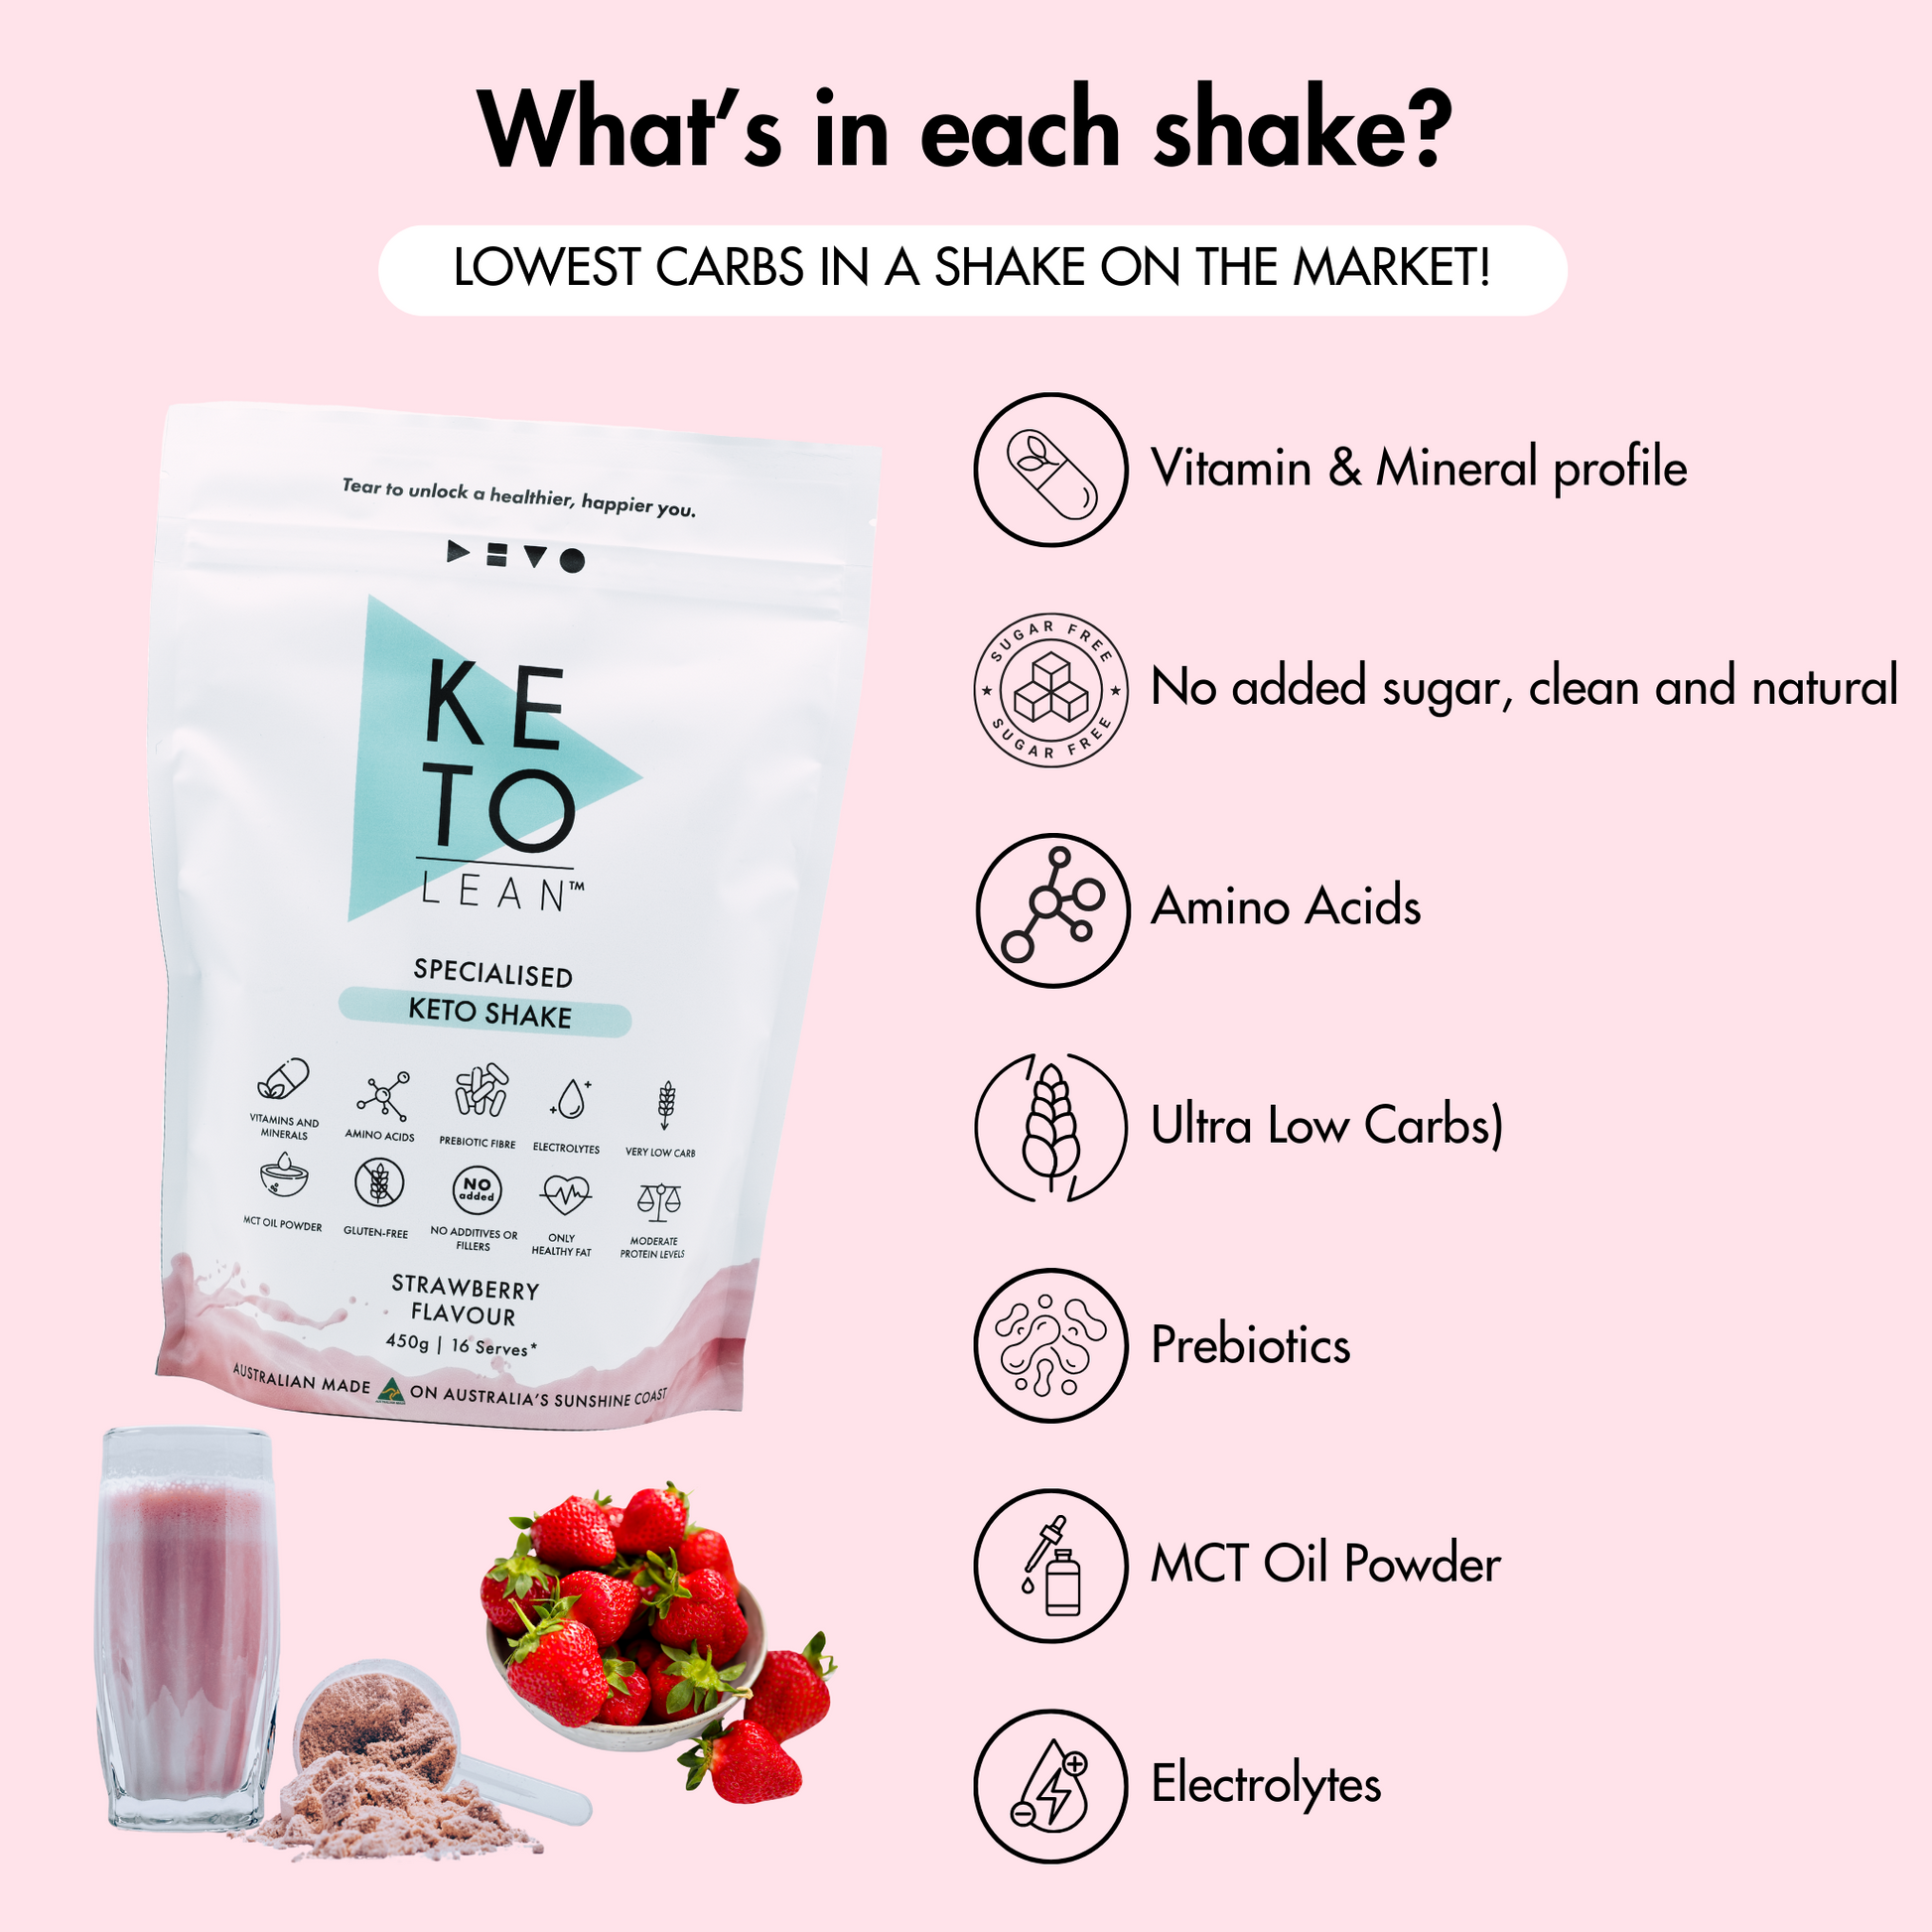 Keto Low Carb Meal Replacement Shake